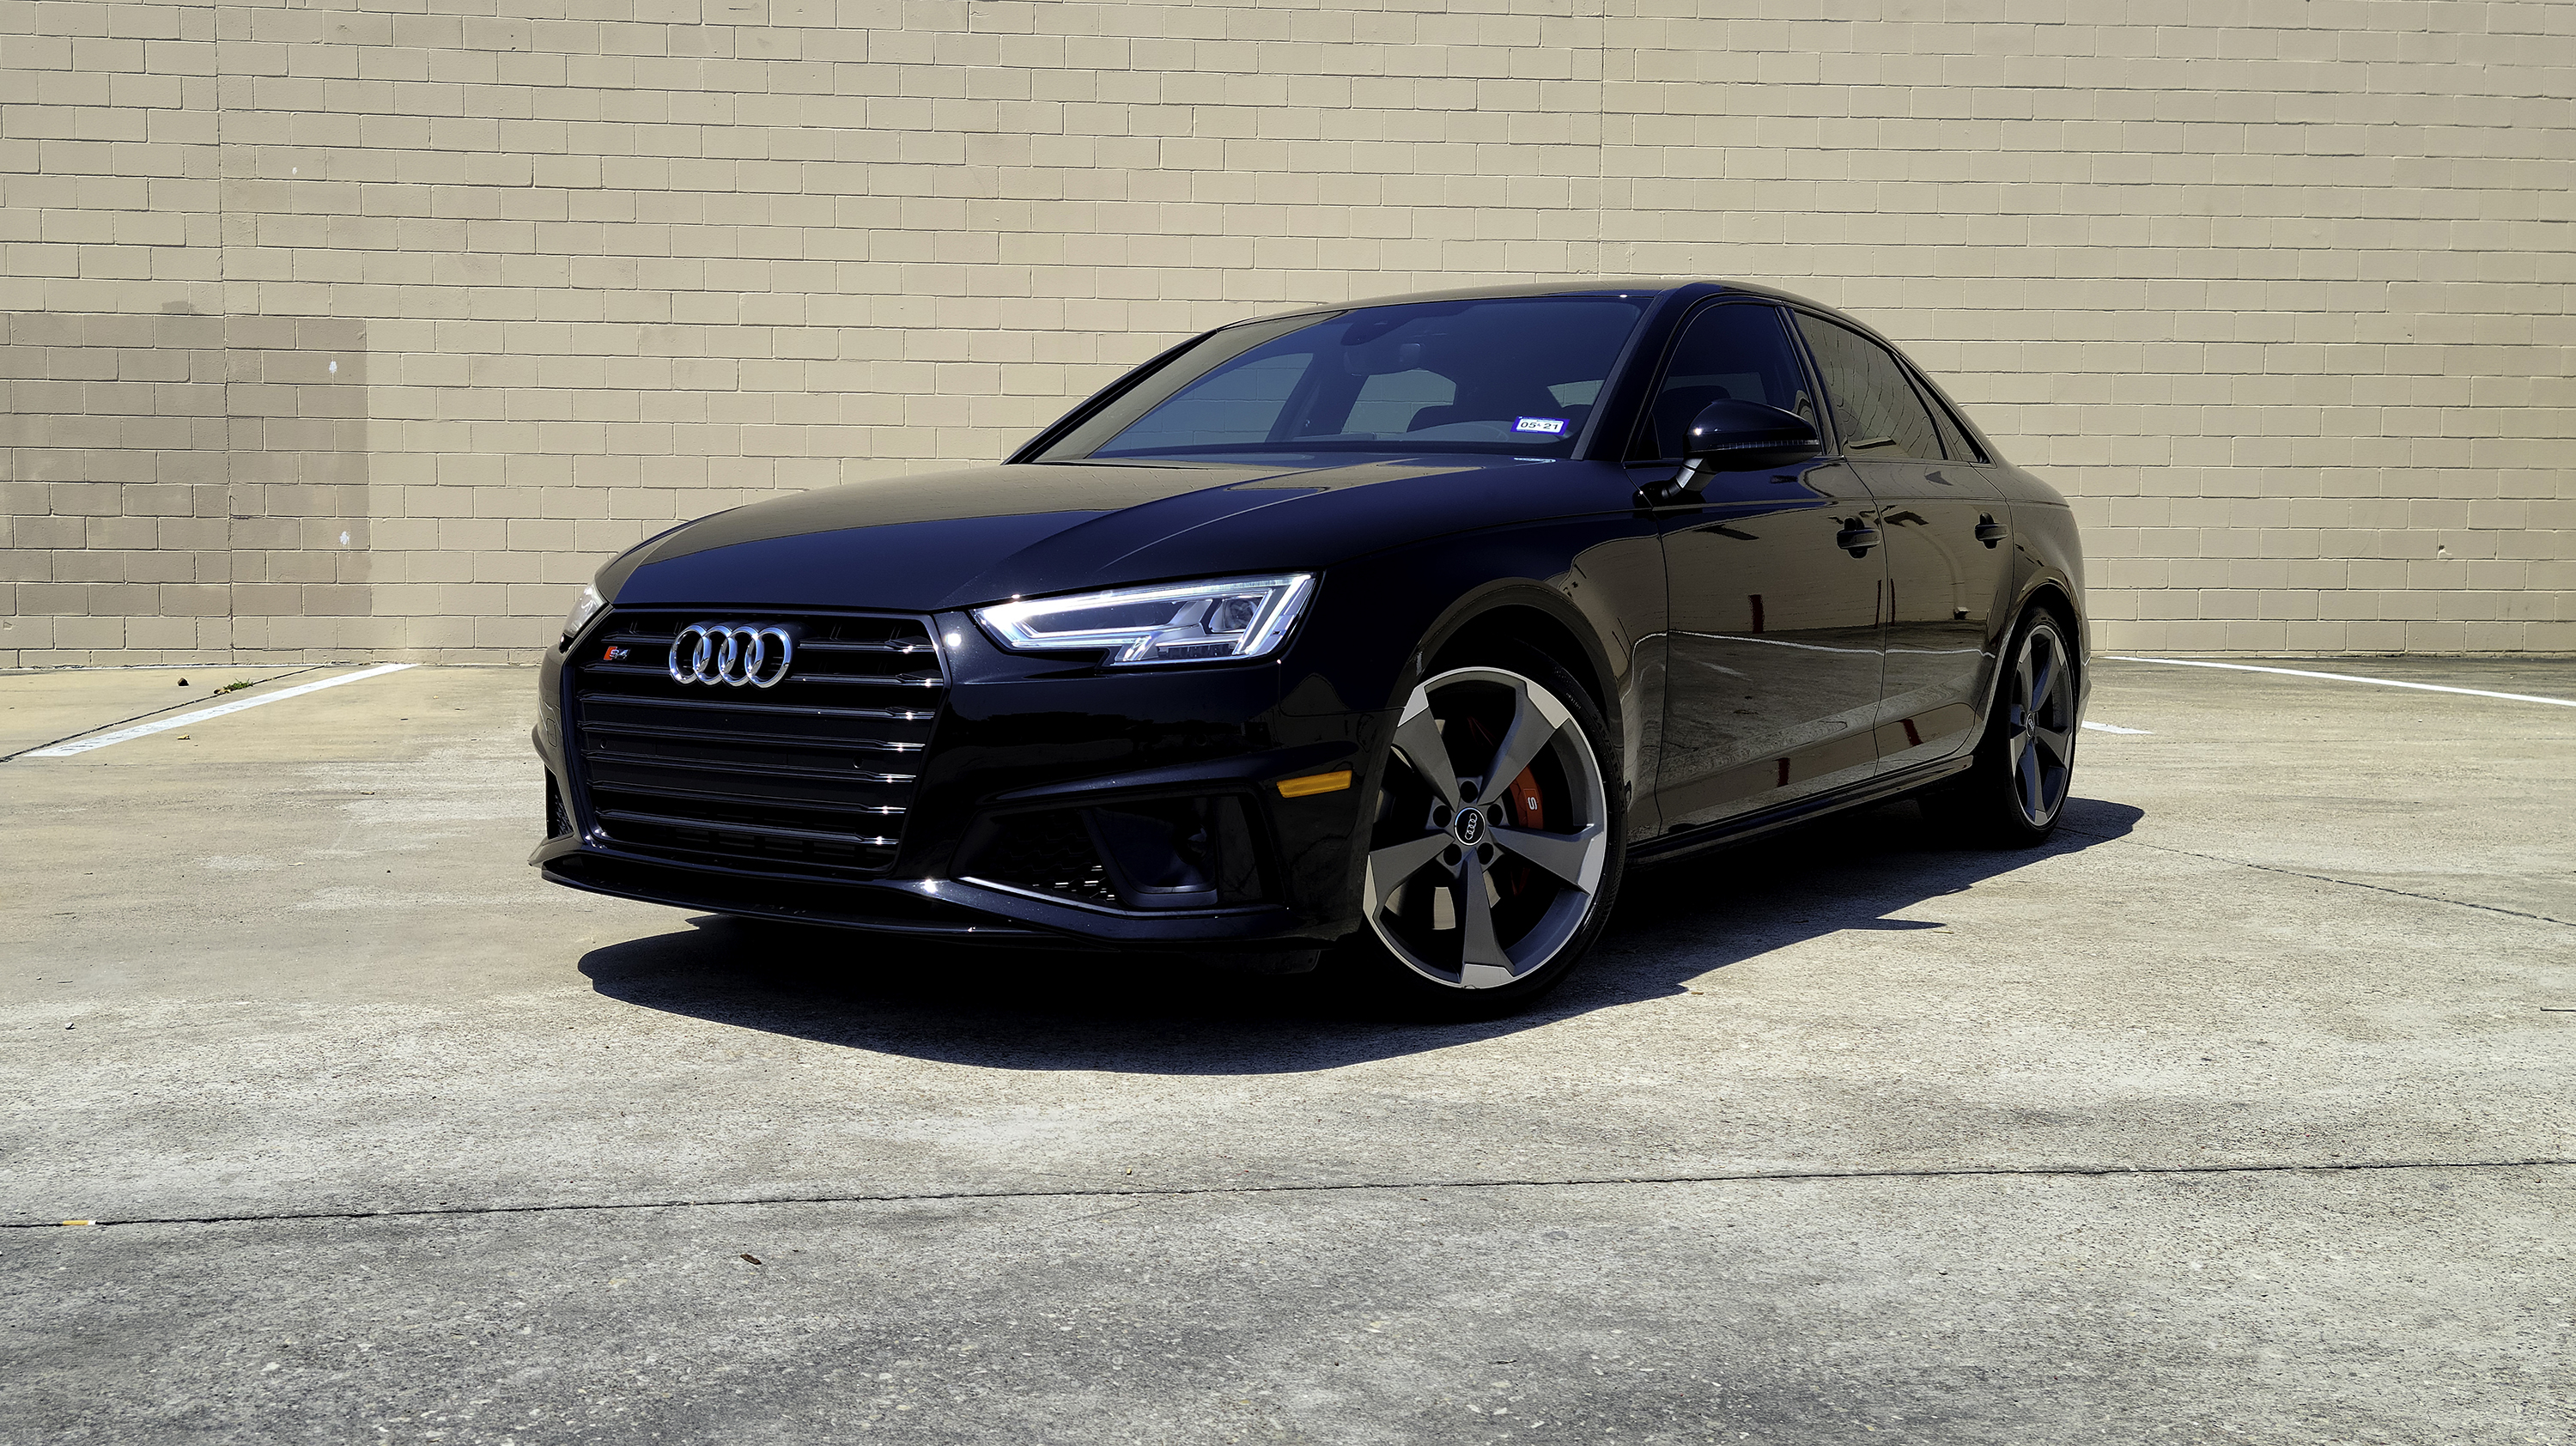 2019 Audi S4 - Black/Red - $699/month - 23 Months/18,375 Miles Remaining! -  Private Transfers - FORUM | LEASEHACKR